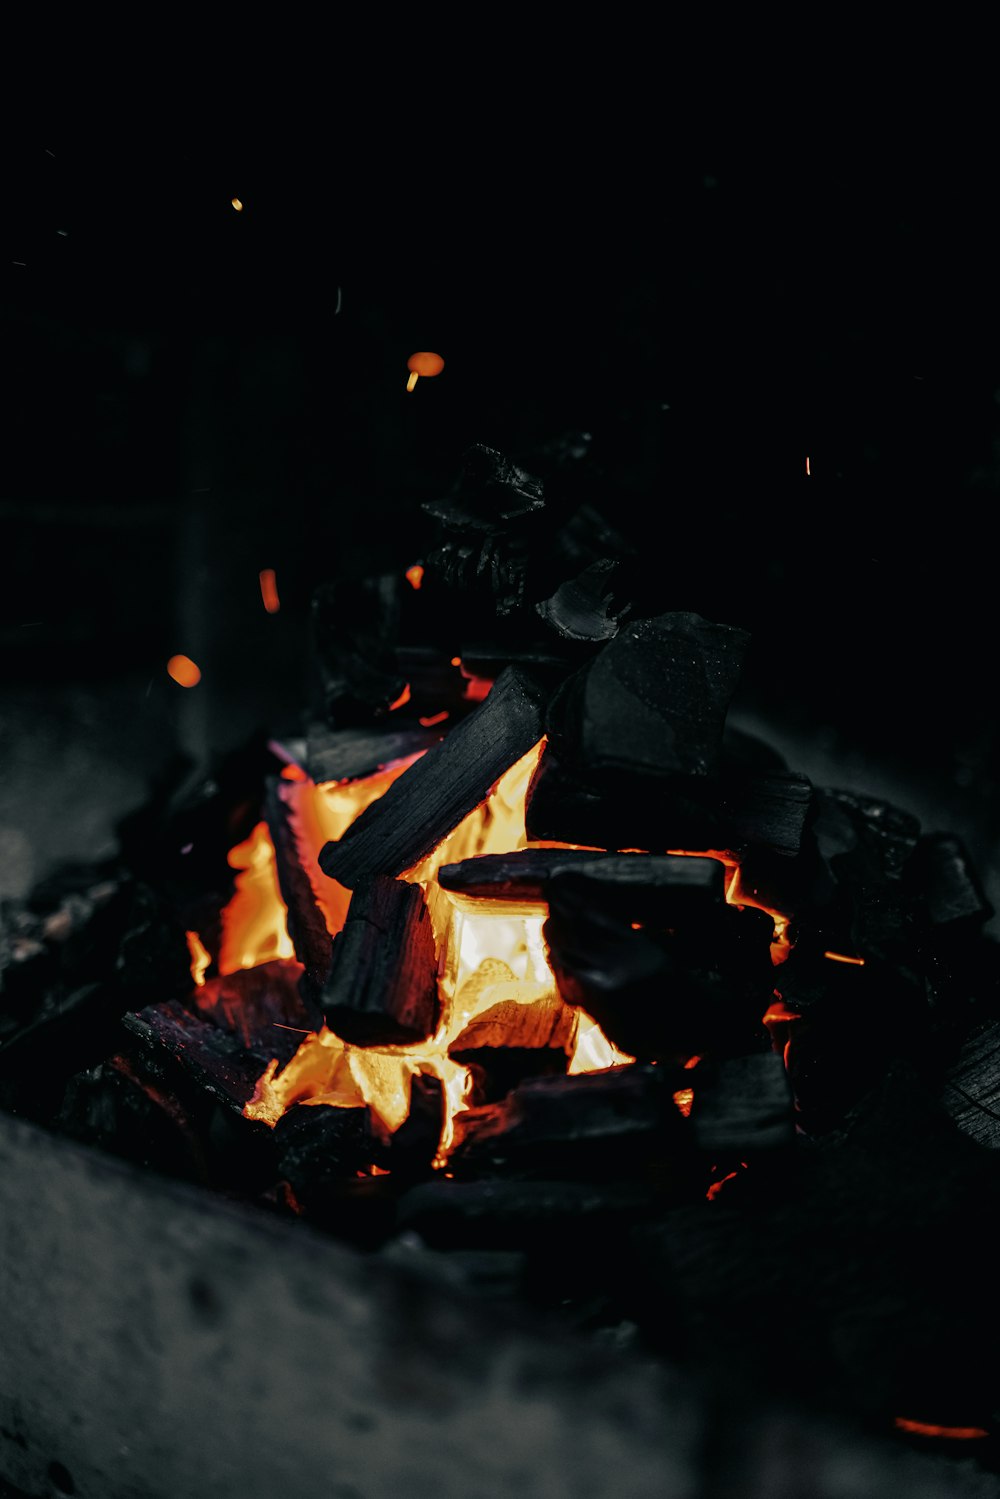 a close up of a fire in a bowl